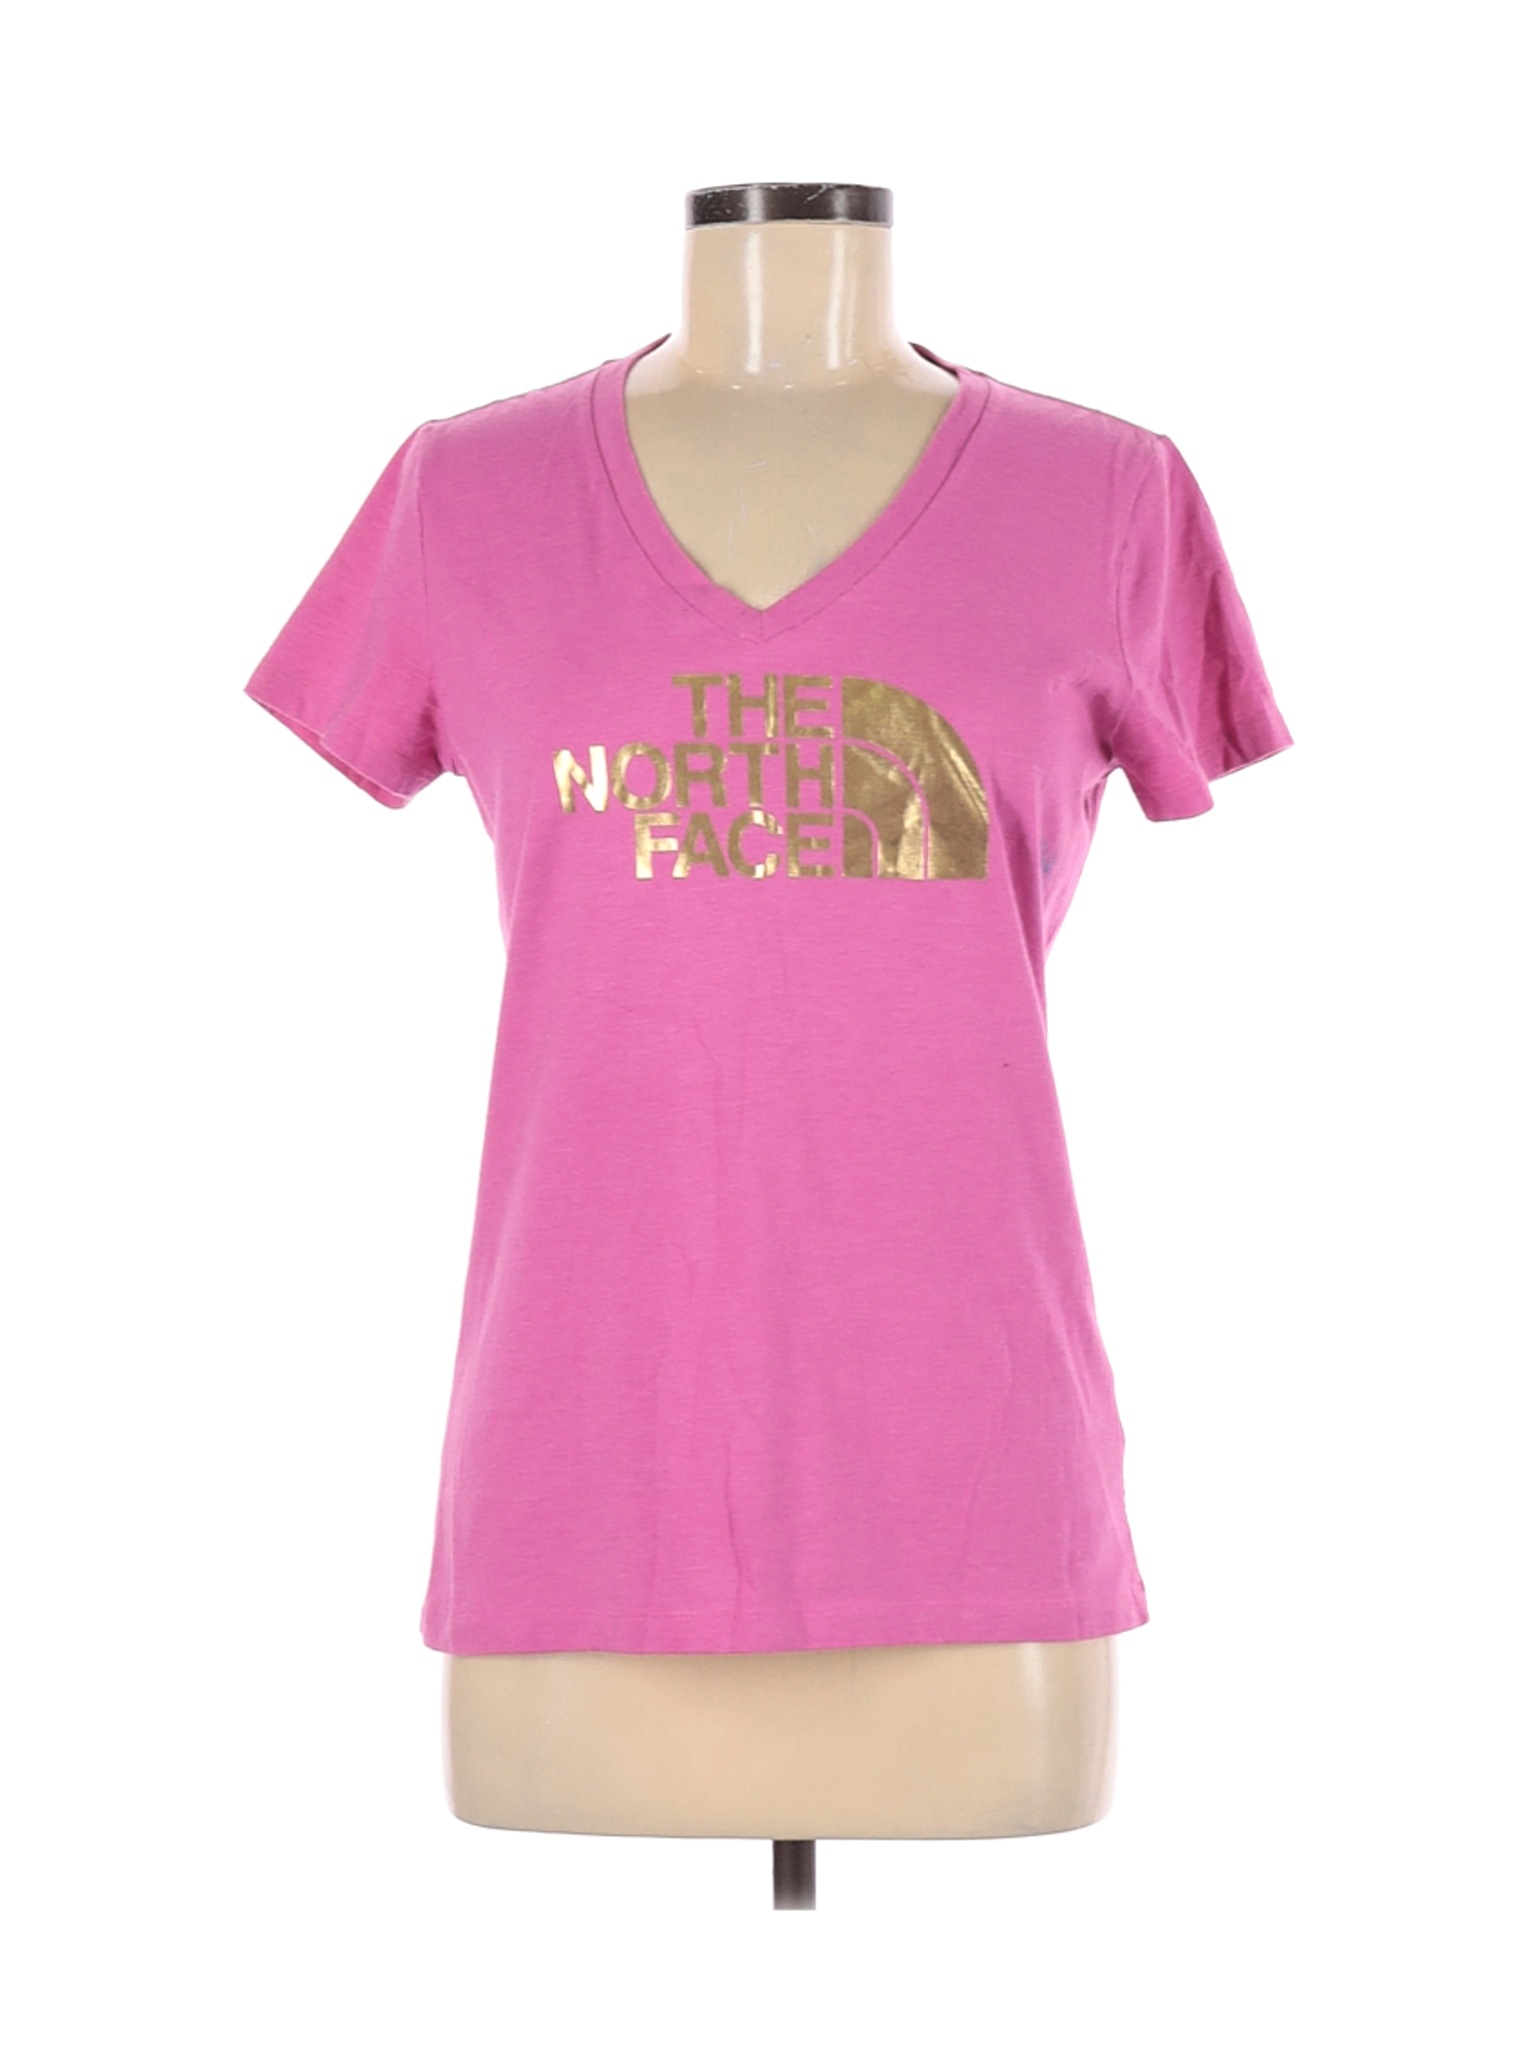 The North Face Women Pink Active T-Shirt M | eBay